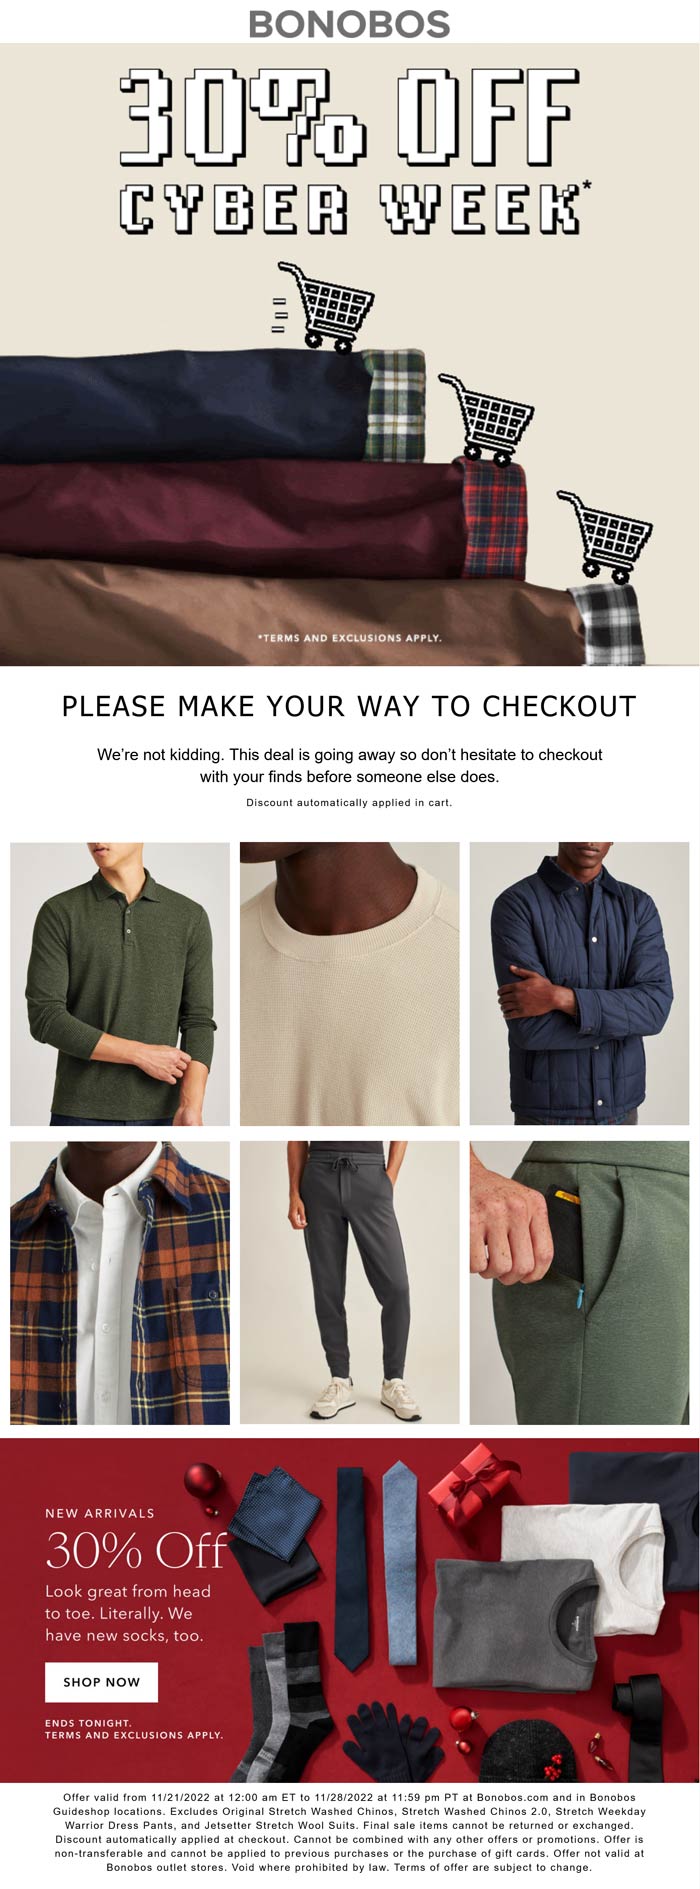 Bonobos coupons & promo code for [January 2023]